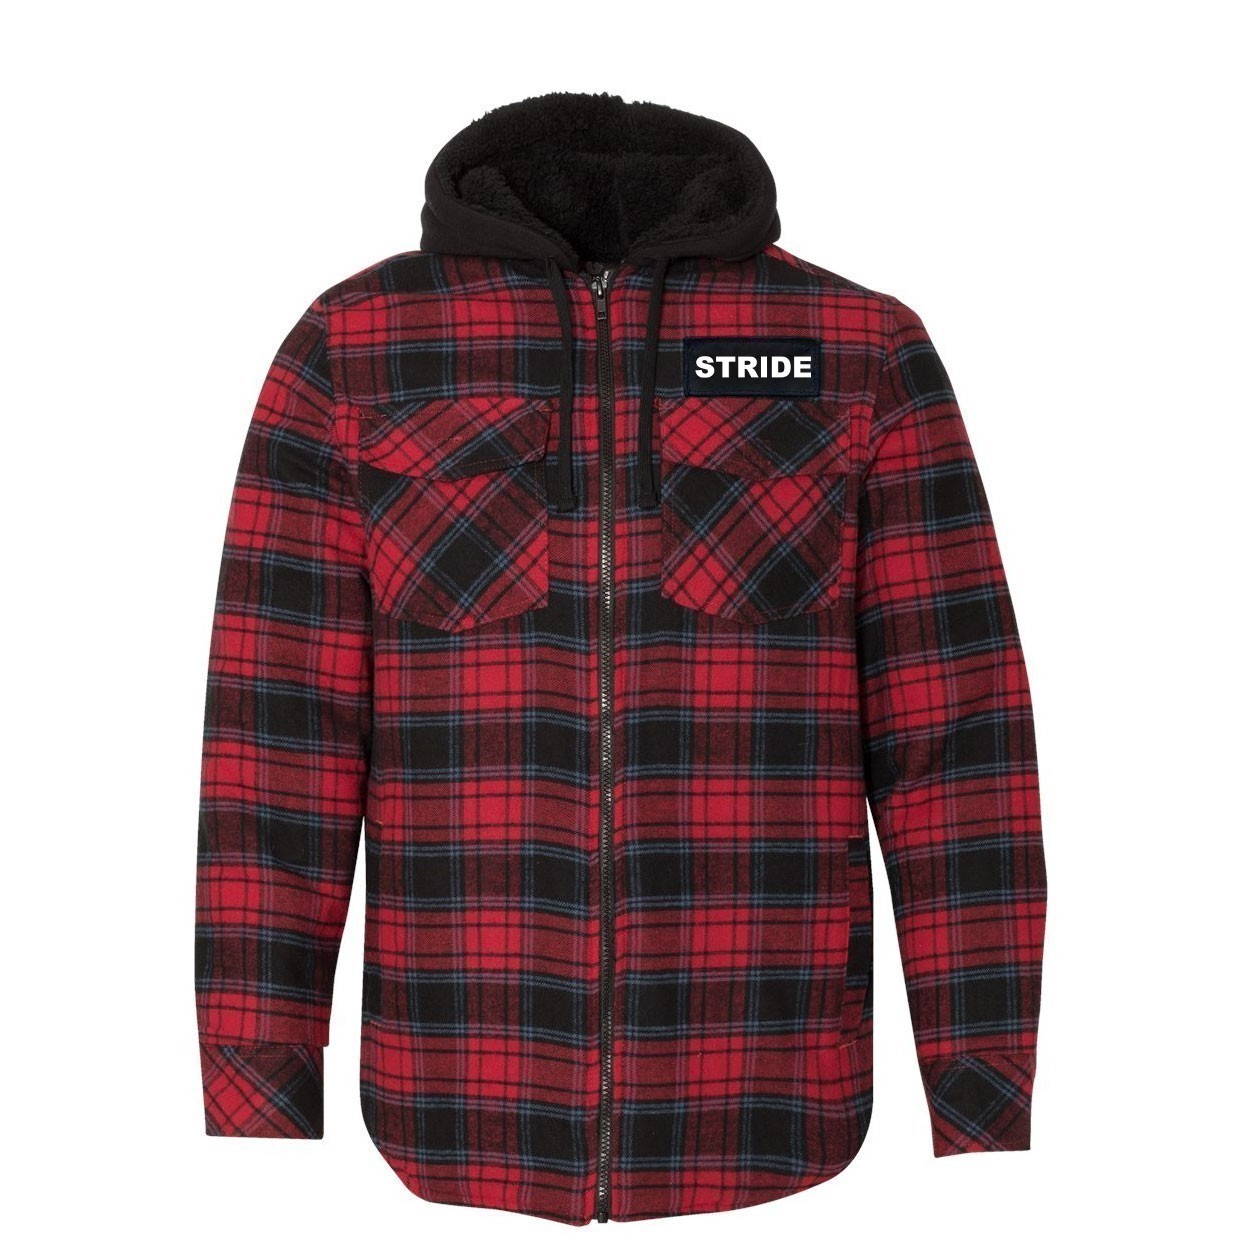 Stride Brand Logo Classic Unisex Full Zip Woven Patch Hooded Flannel Jacket Red/Black Buffalo